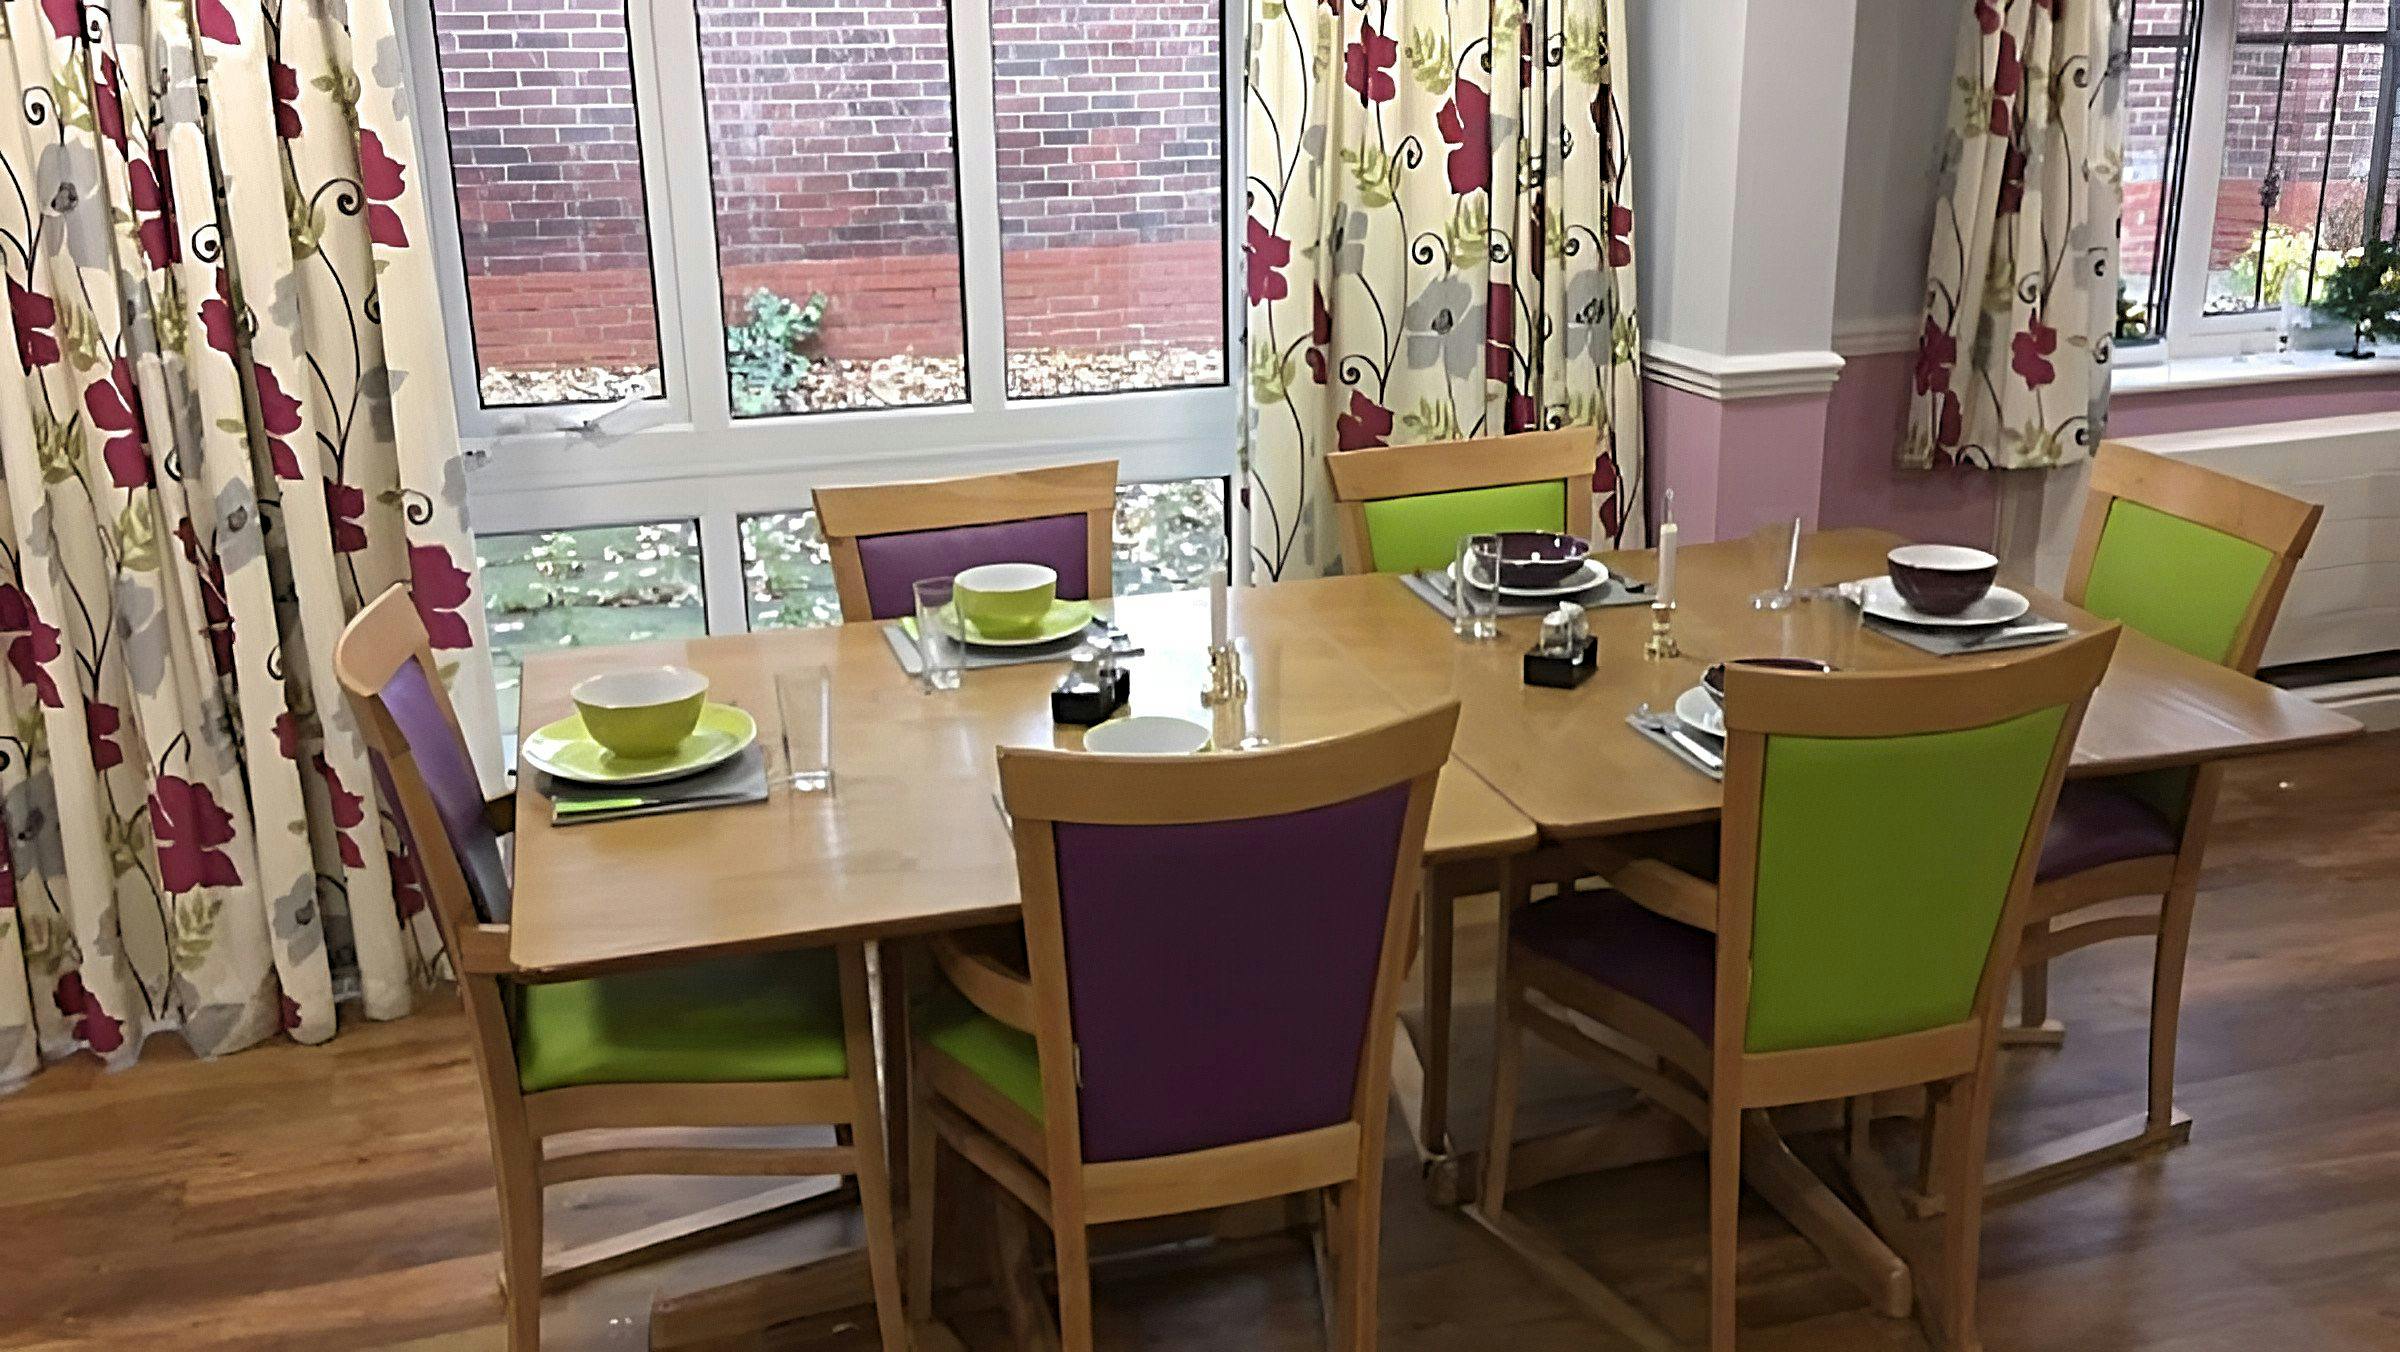 Cromwell Court care home